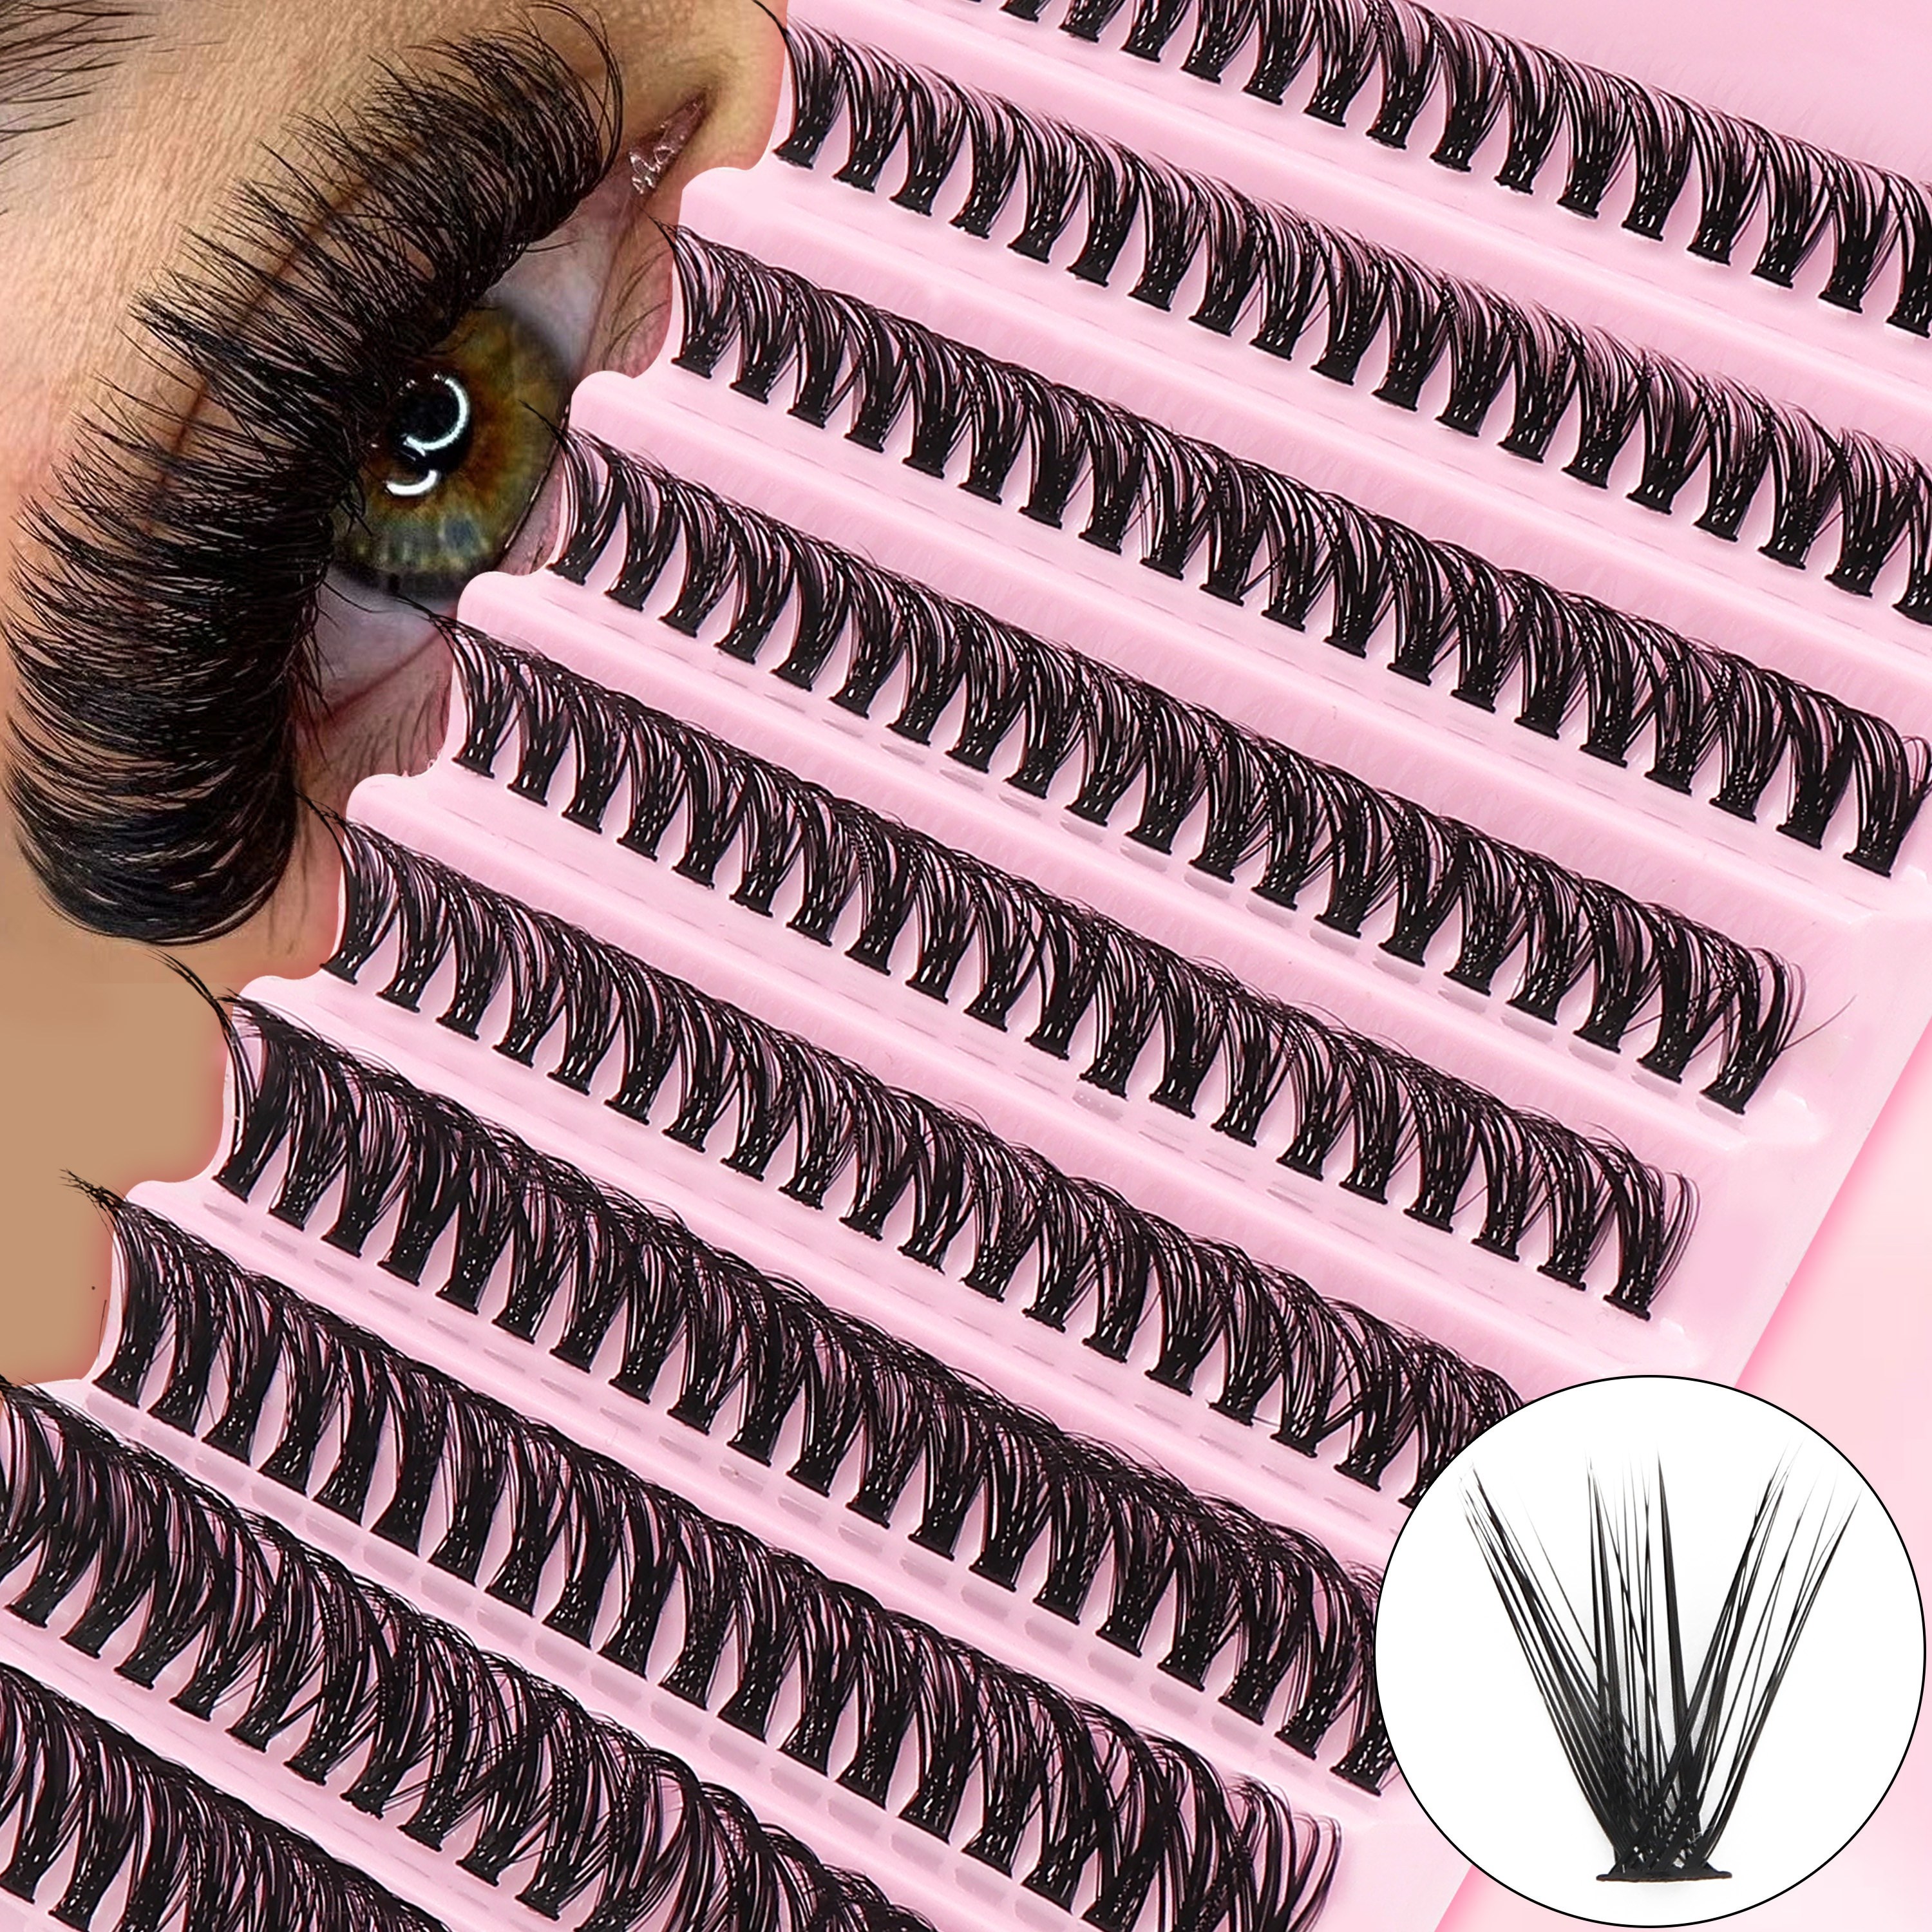 

Soft & Natural-looking Cluster Eyelash Extensions - 200pcs, Mixed Lengths (8-16mm), D , Waterproof, Faux Mink Lashes For Everyday & Party Makeup